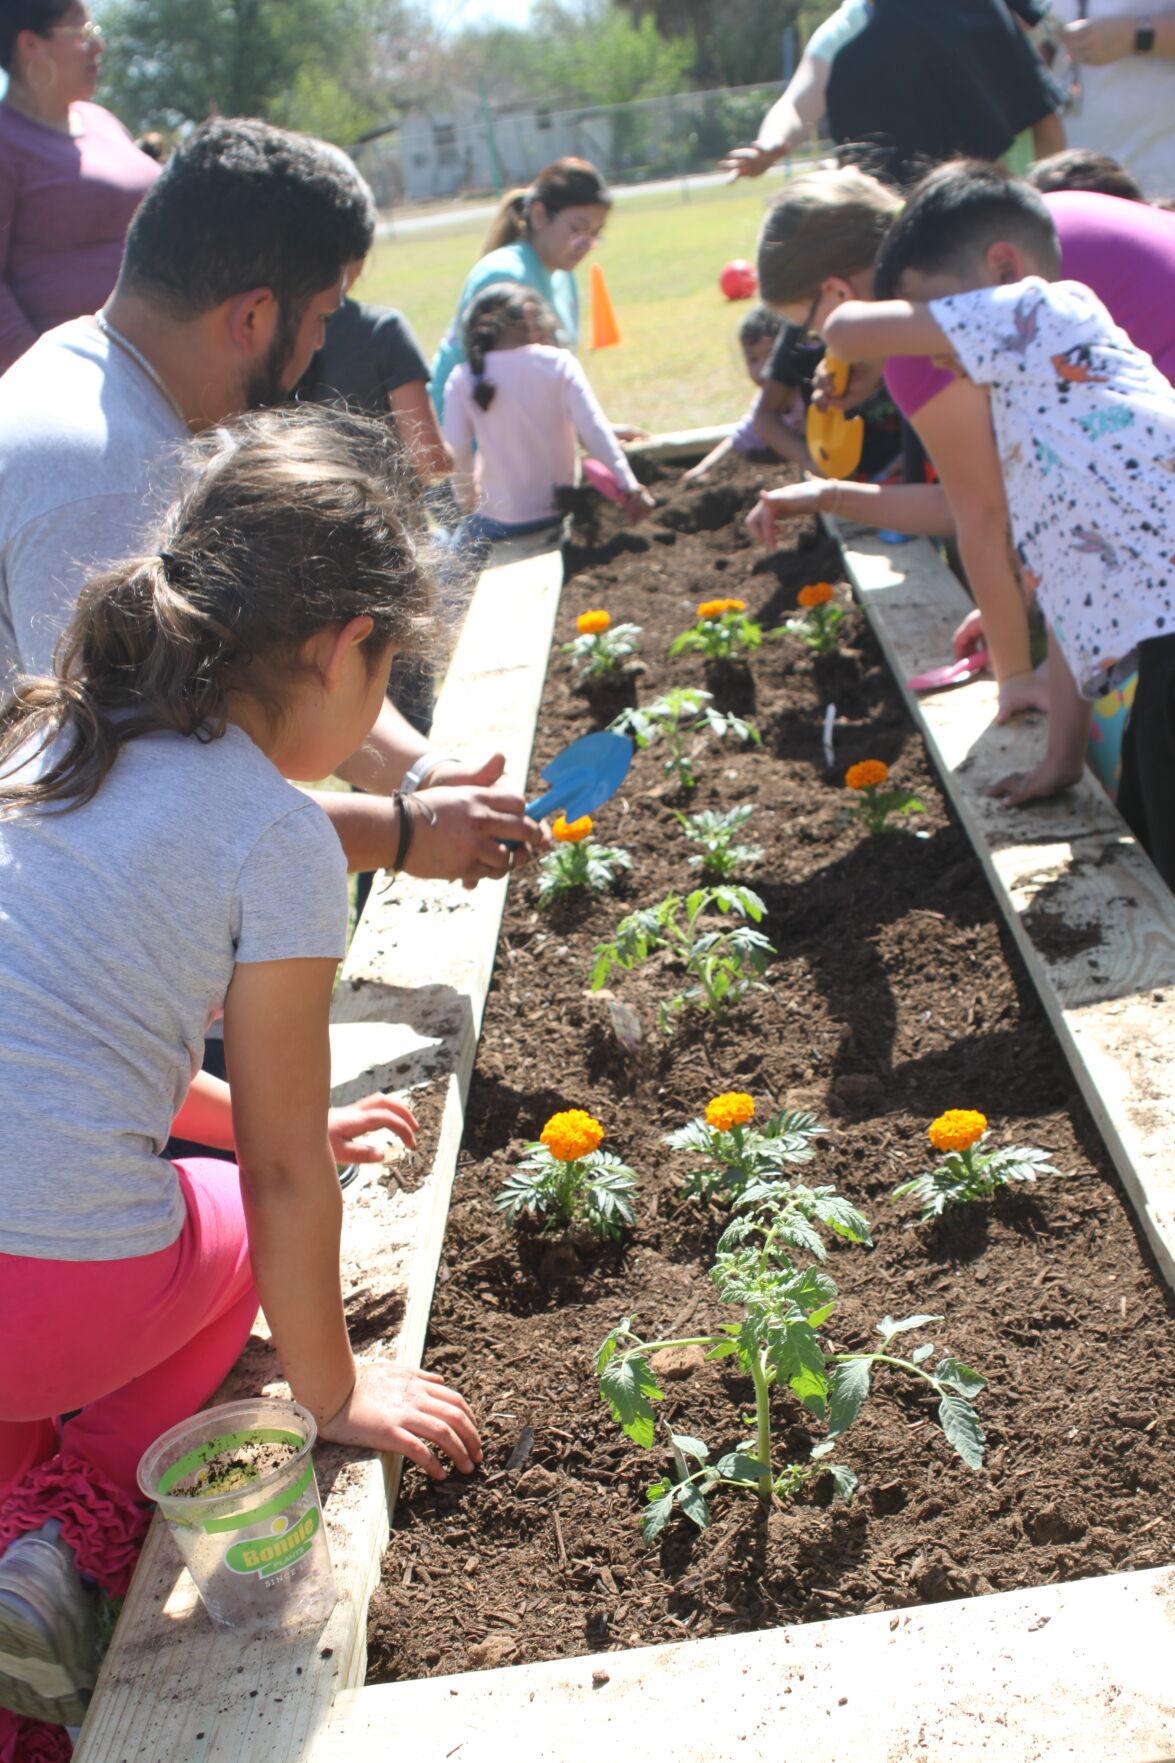 Students and their families worked together to create the first garden at the Children’s Learning Institute. The garden will enhance the school’s science curriculum and provide an opportunity for hands-on learning.